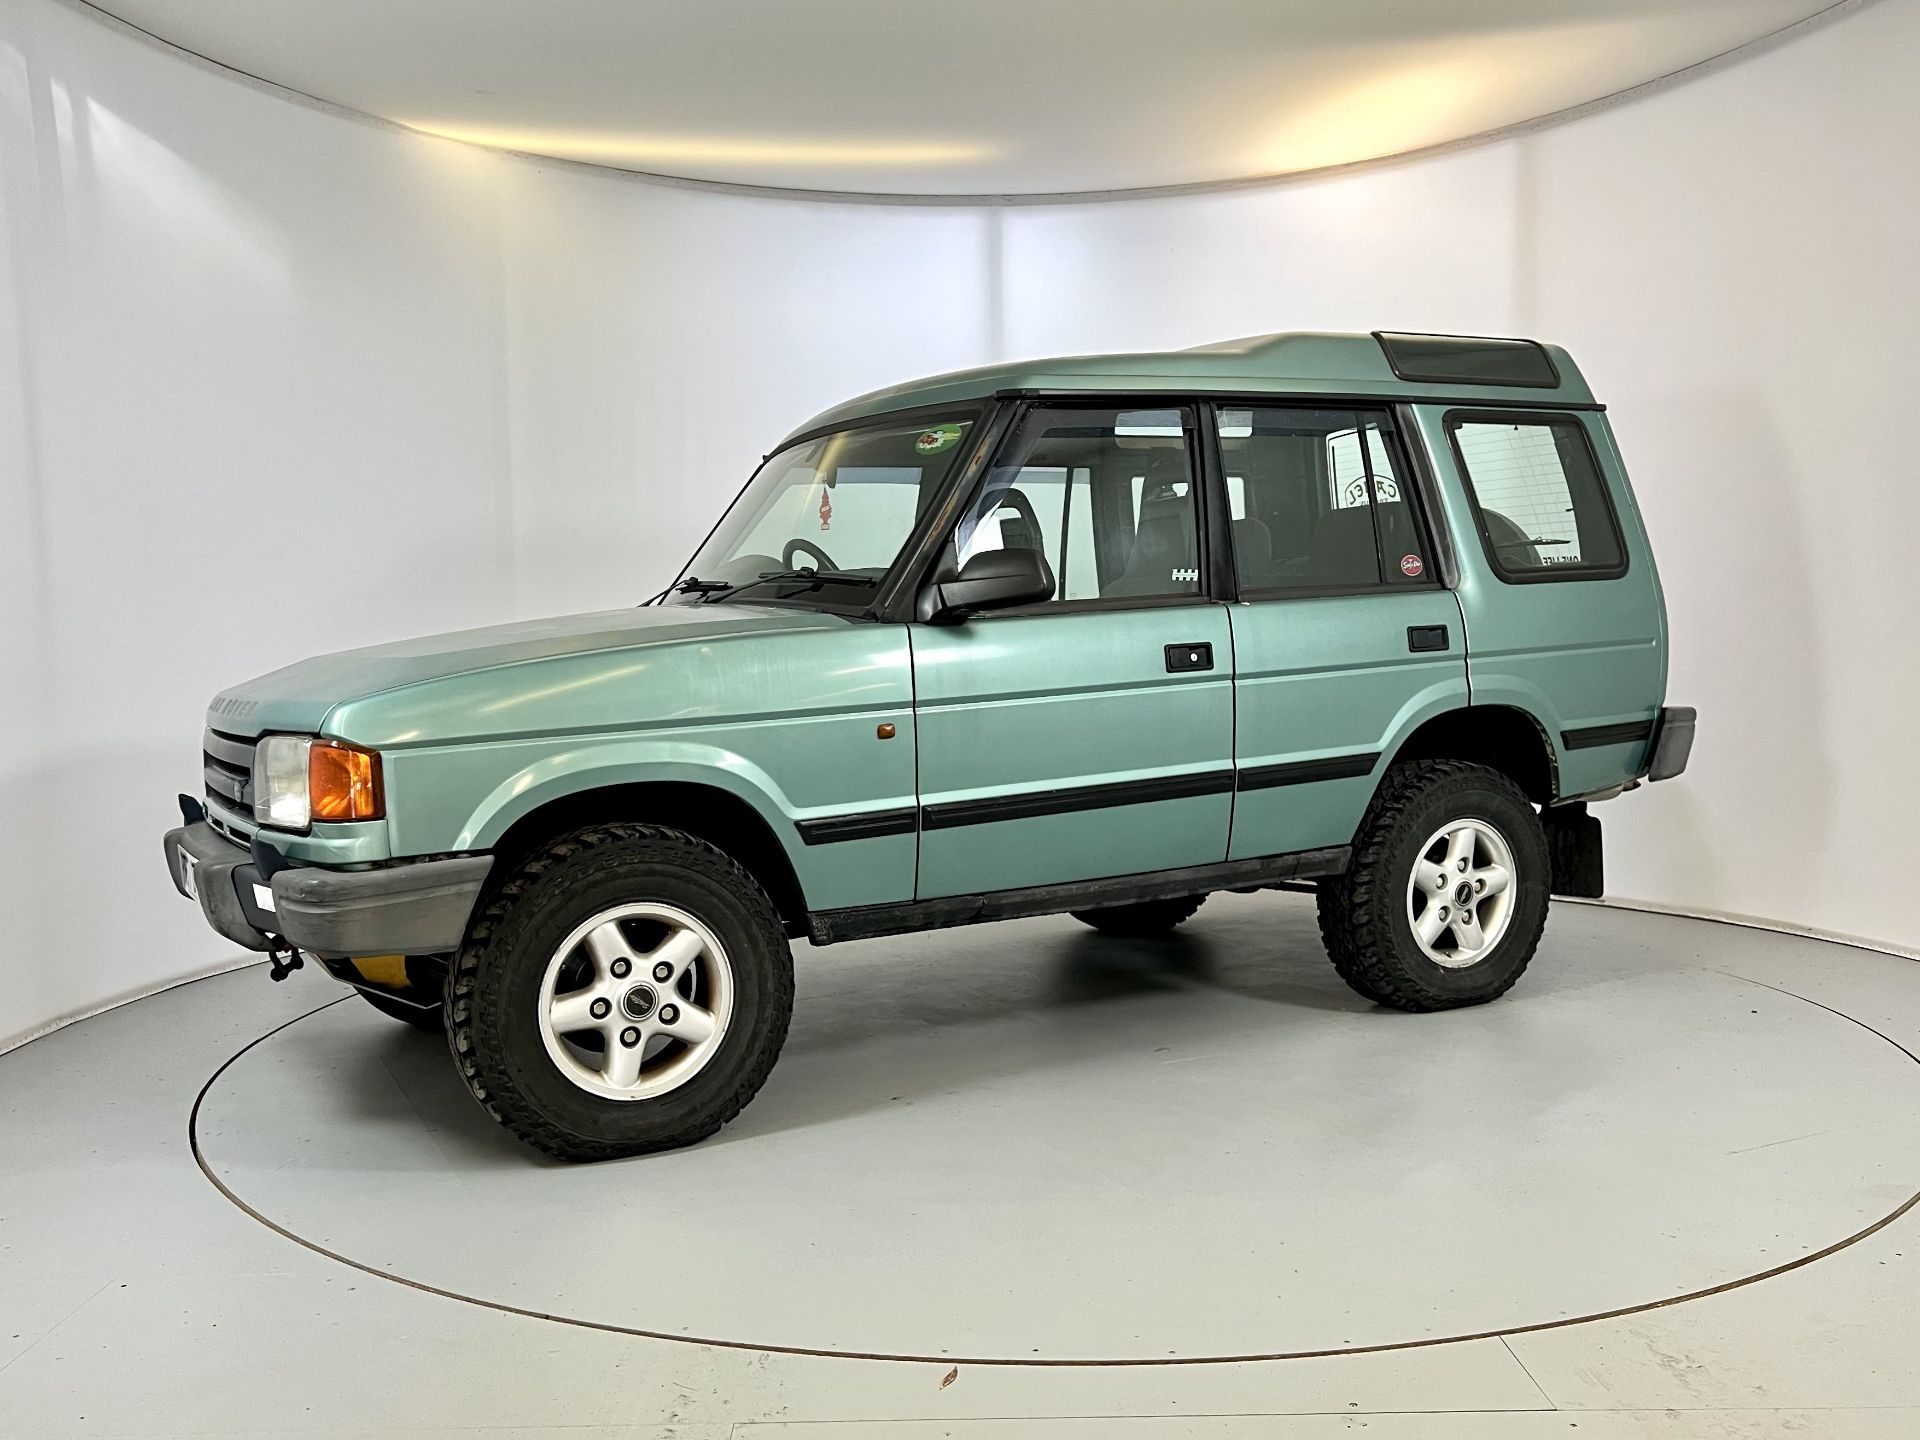 Land Rover Discovery - Image 4 of 34